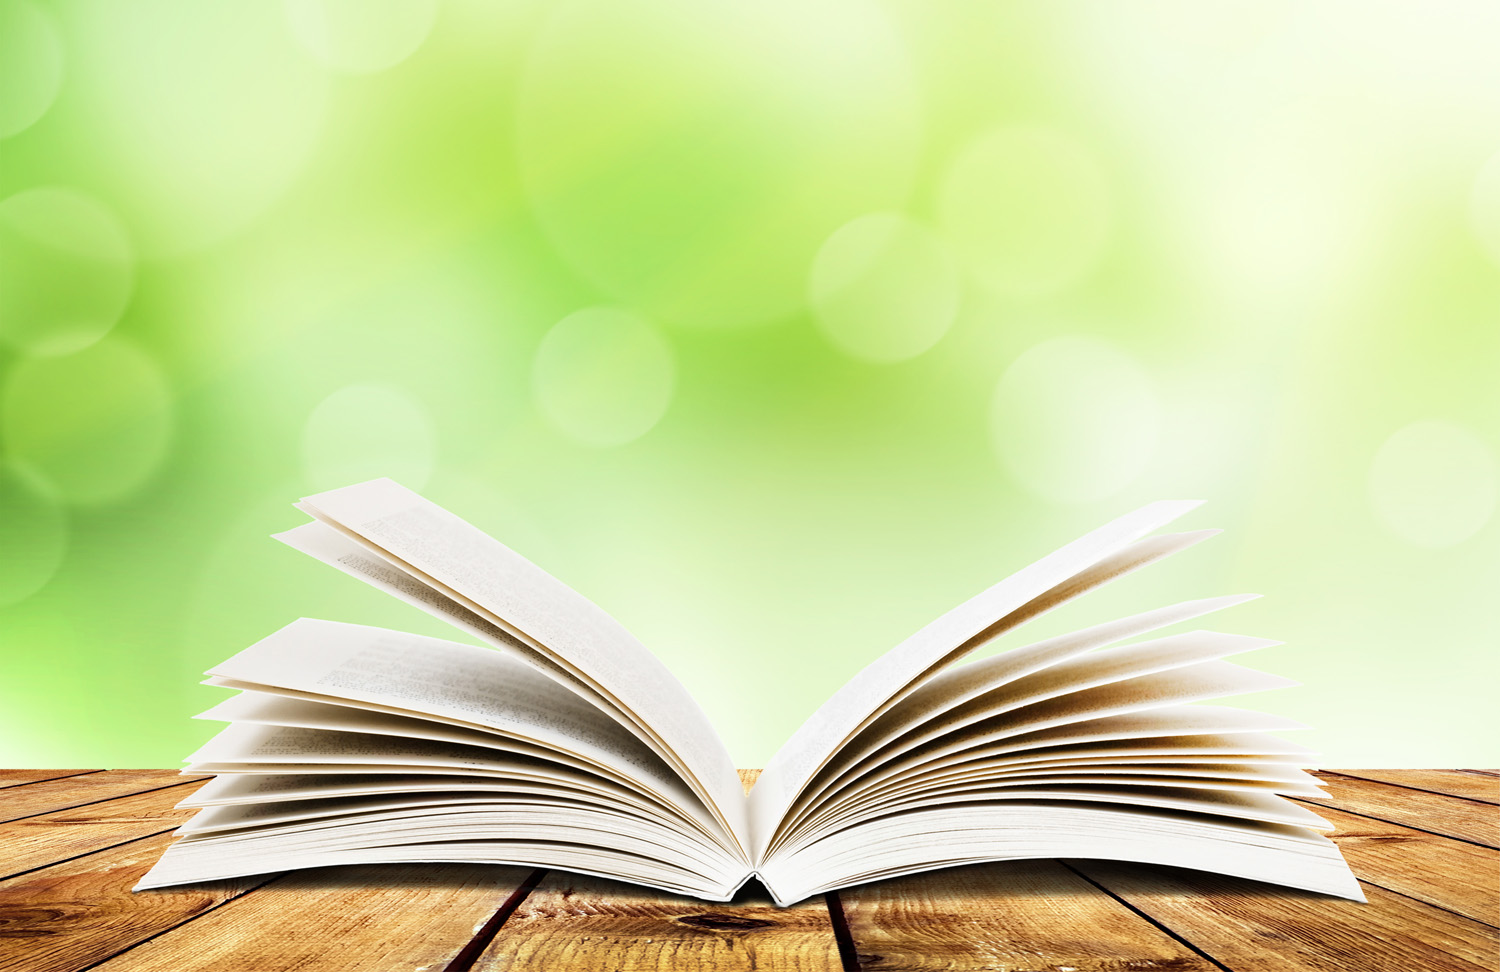 Open Book On A Table With Blurred Leafy Background